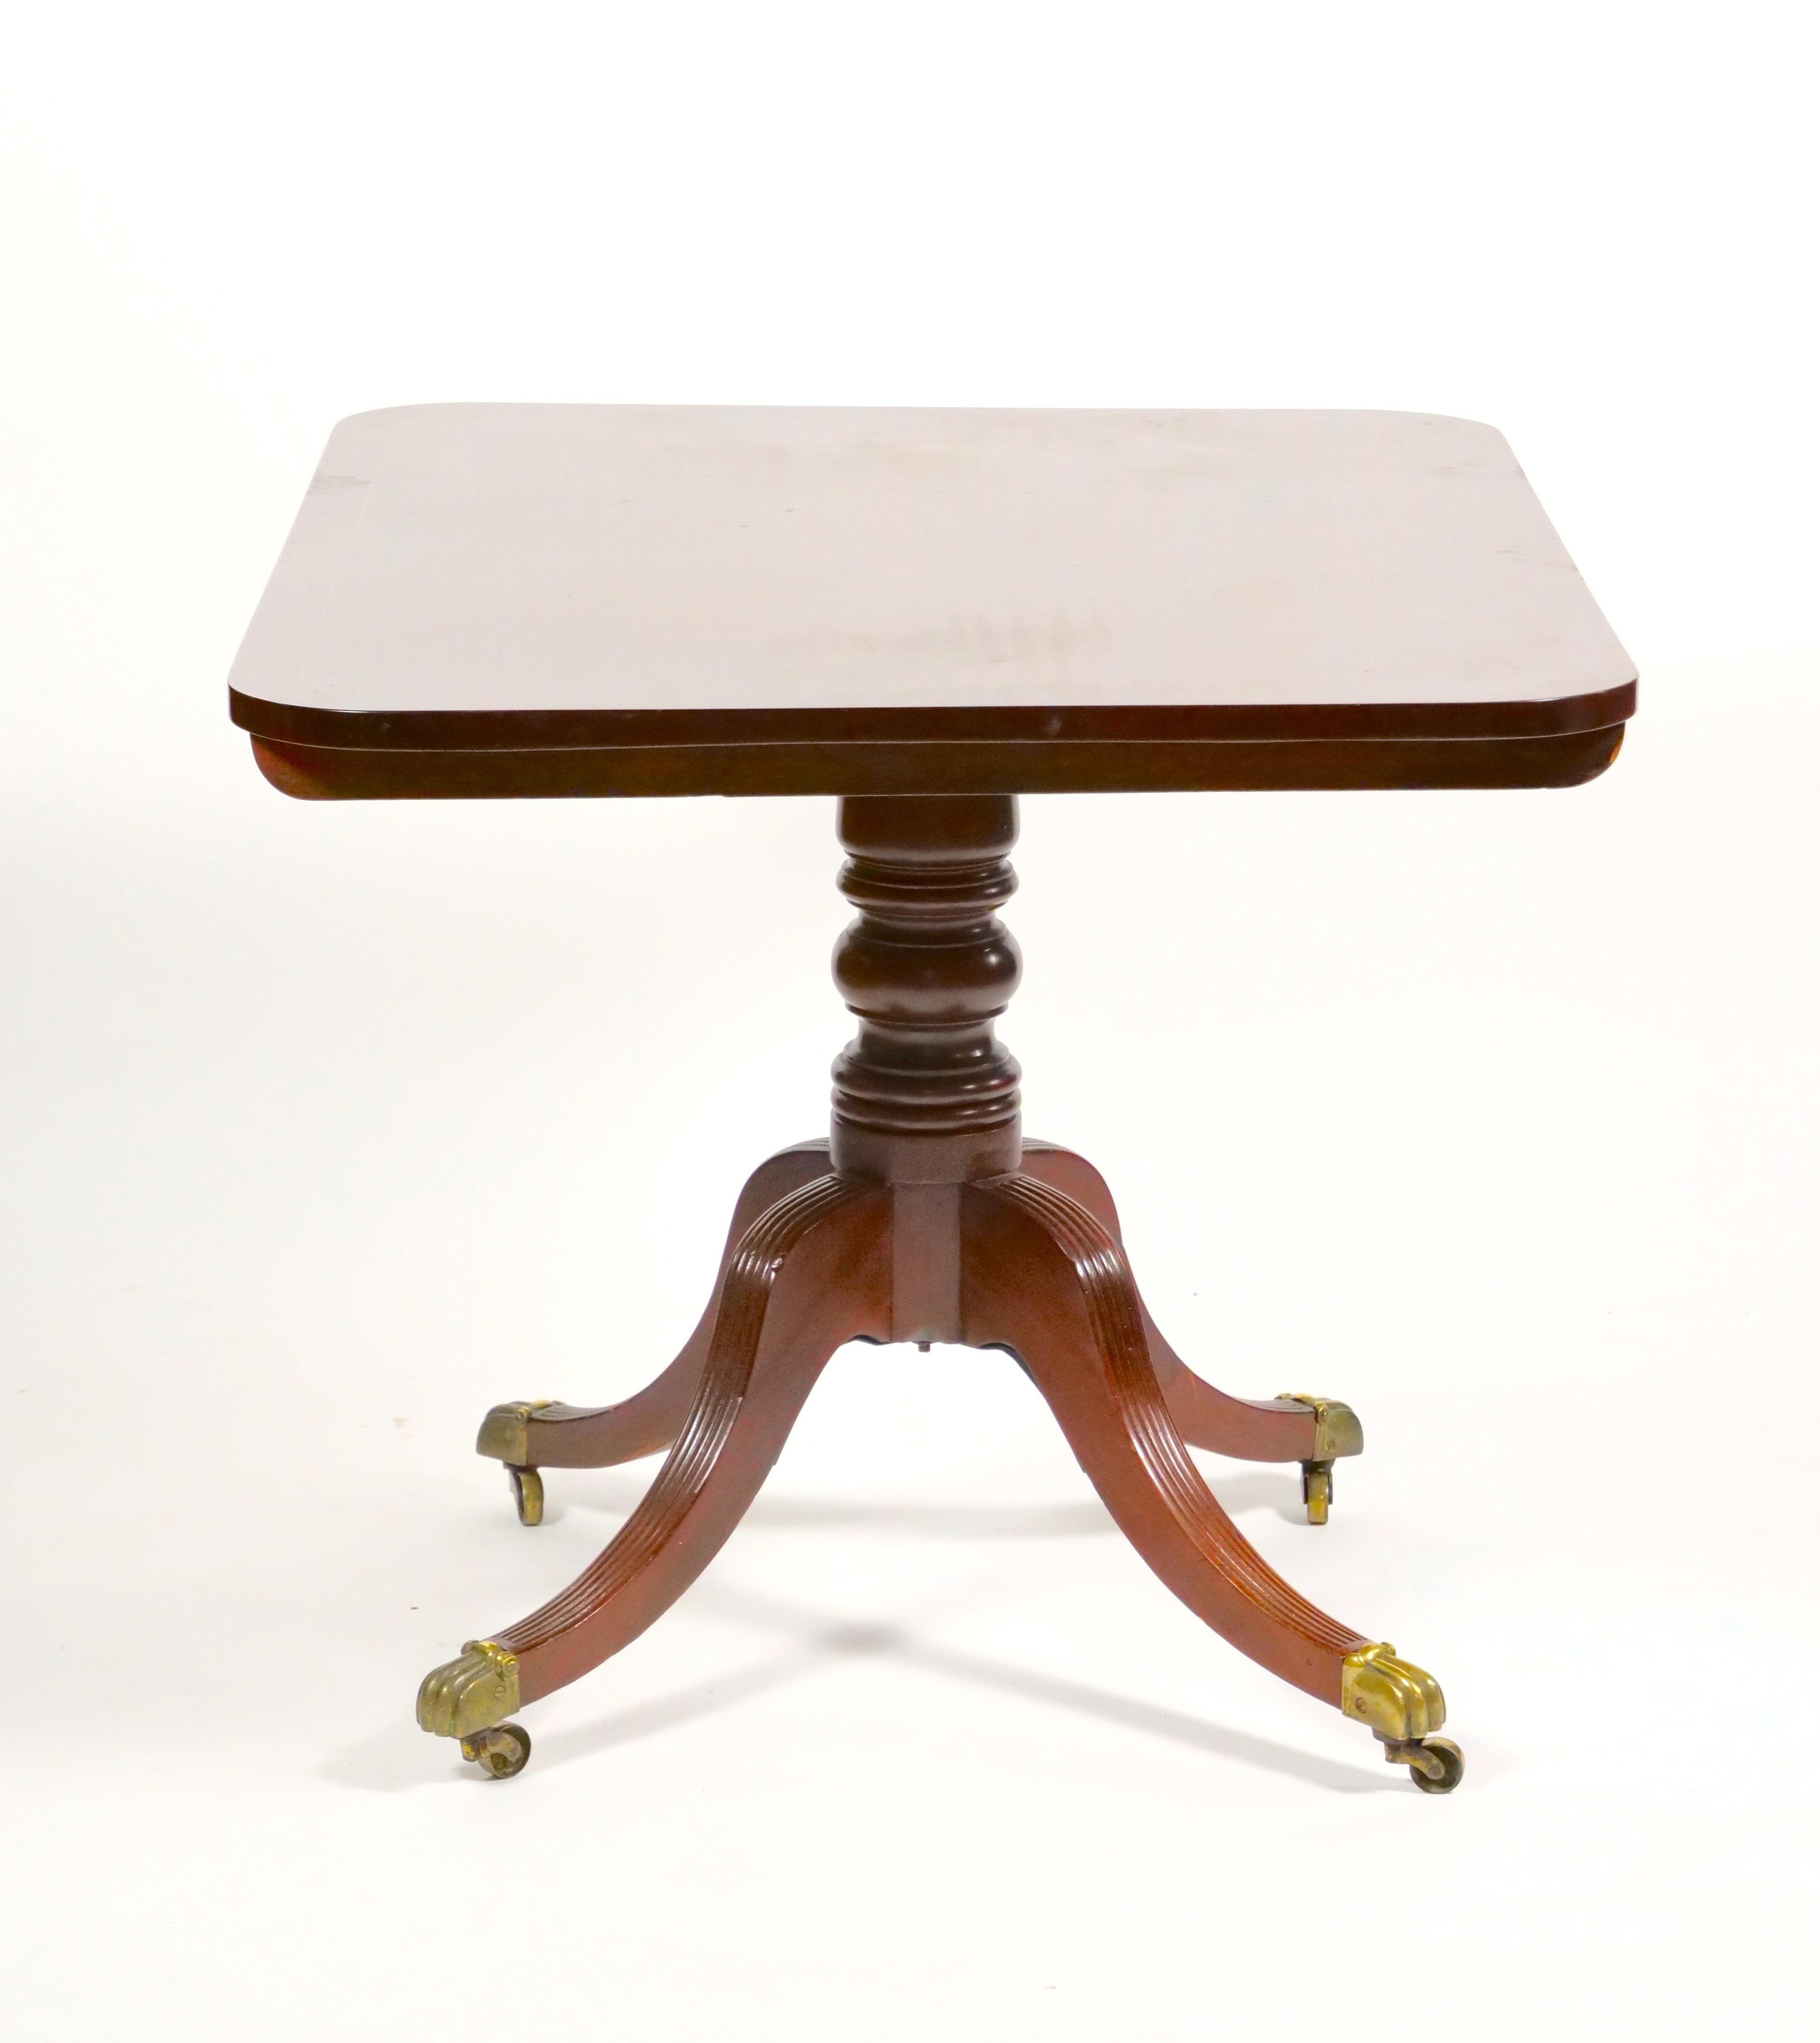 Transform your living space with this stunning 19th Century English George III Inlay Top Mahogany Wood Breakfast Table, a perfect combination of style, elegance, and functionality. This table is a testament to the craftsmanship and design of the